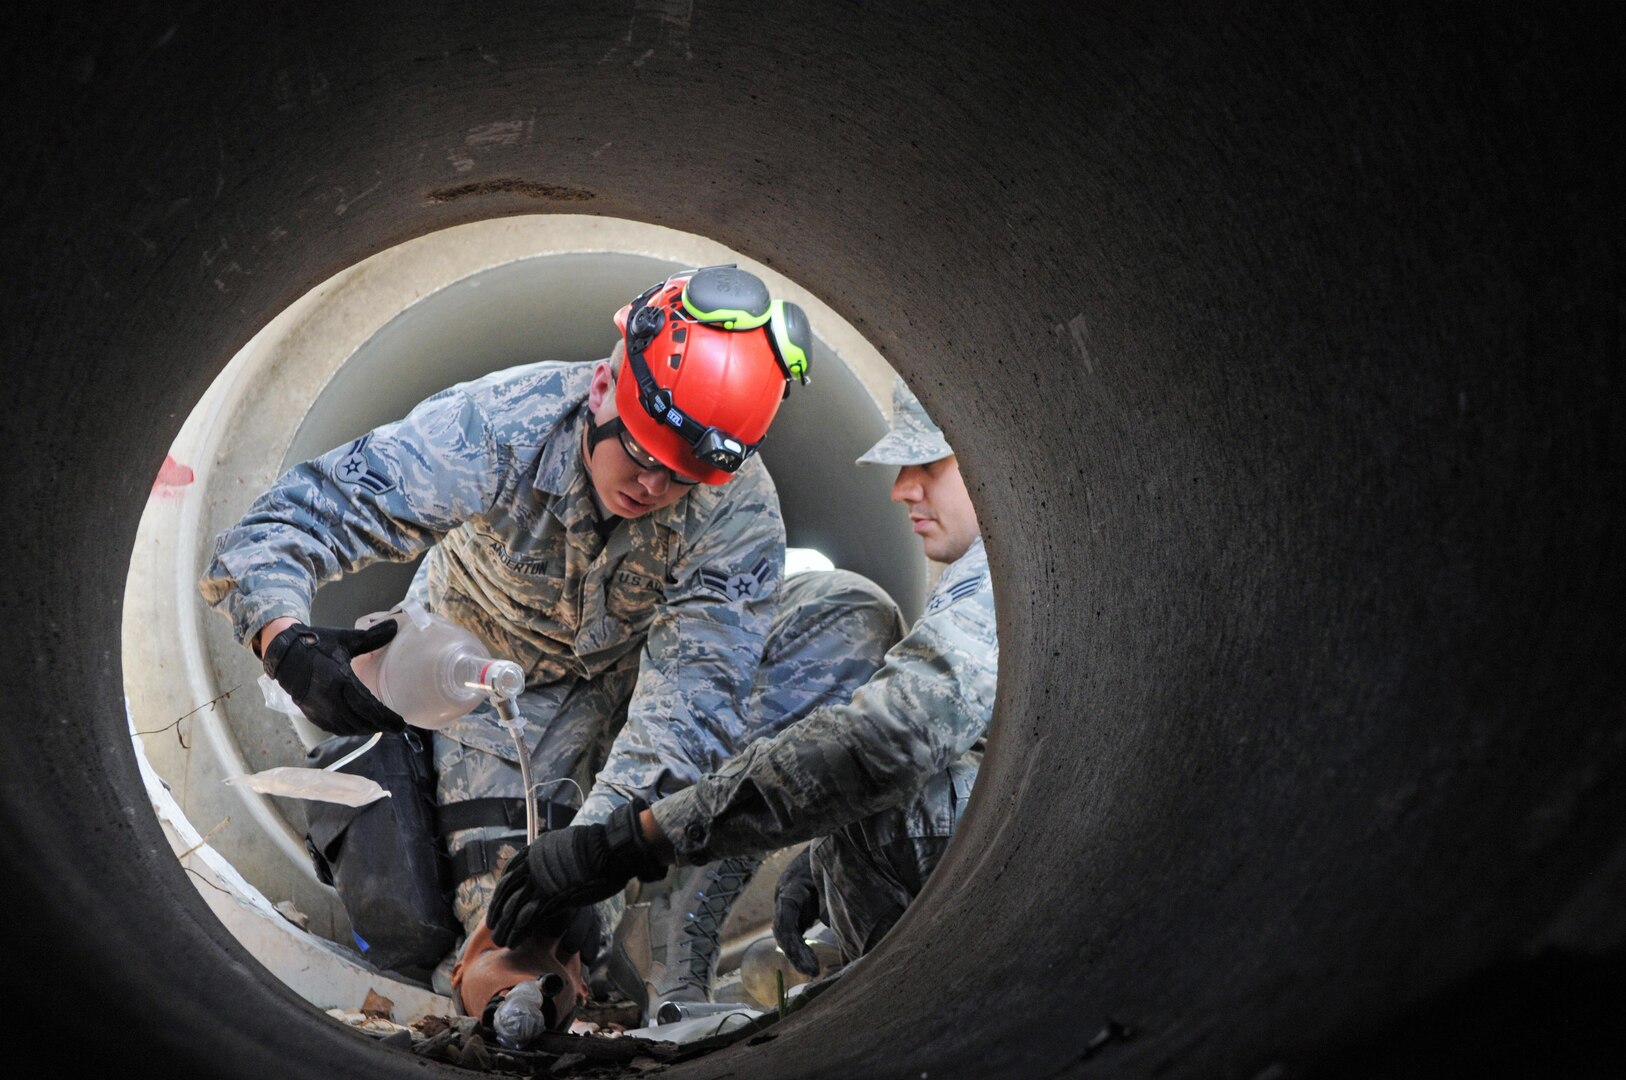 Airman 1st Class Brooks Anderton, an aerospace medical technician assigned to the 151st Chemical, Biological, Radiological, Nuclear (CBRN) Enhanced Response Force Package (CERFP) treats a simulated casualty inside a tunnel during search and recovery training on April 24, 2016, at the Davis County Unified Fire rubble pile in Layton, Utah.